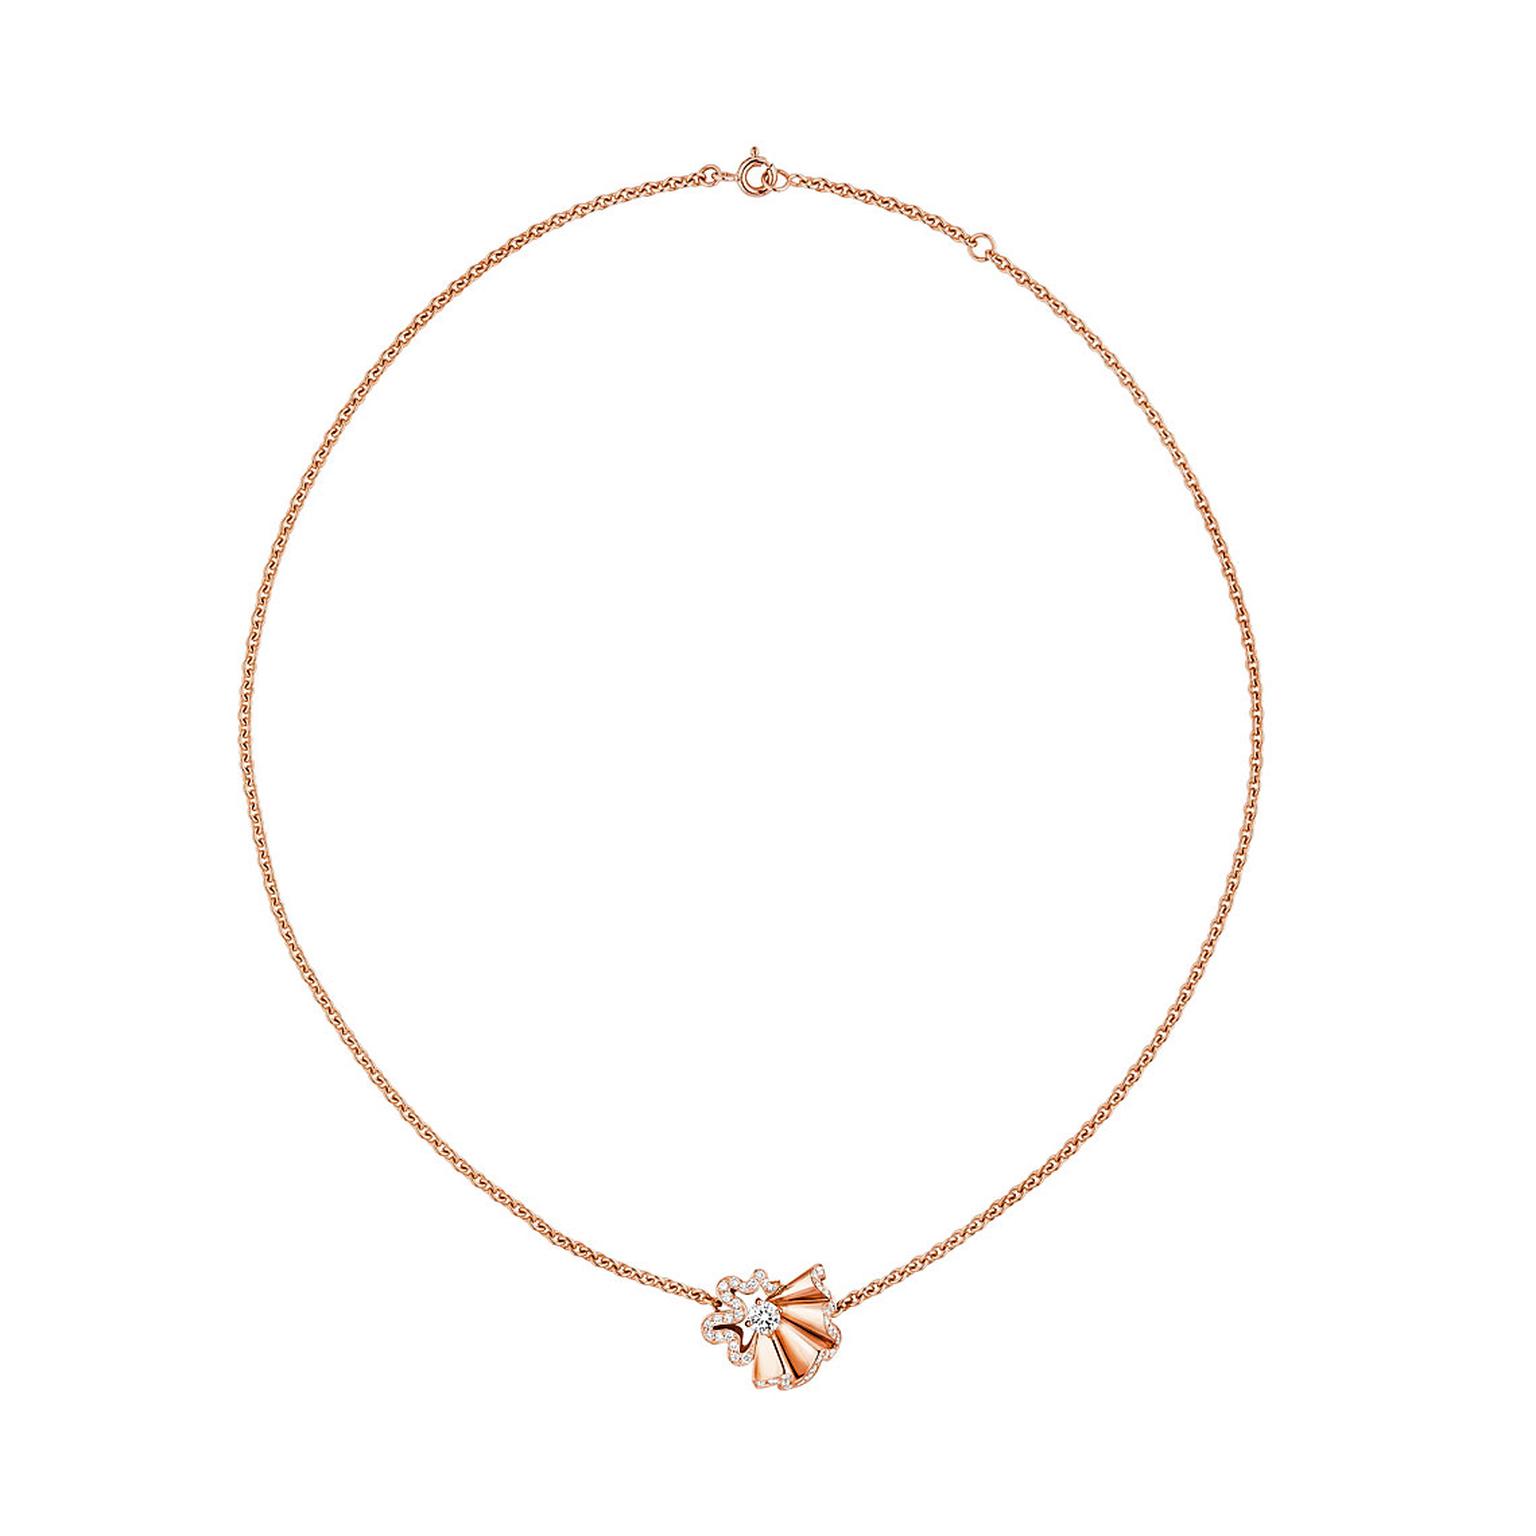 Archi Dior Cocotte collier rose gold and diamond necklace